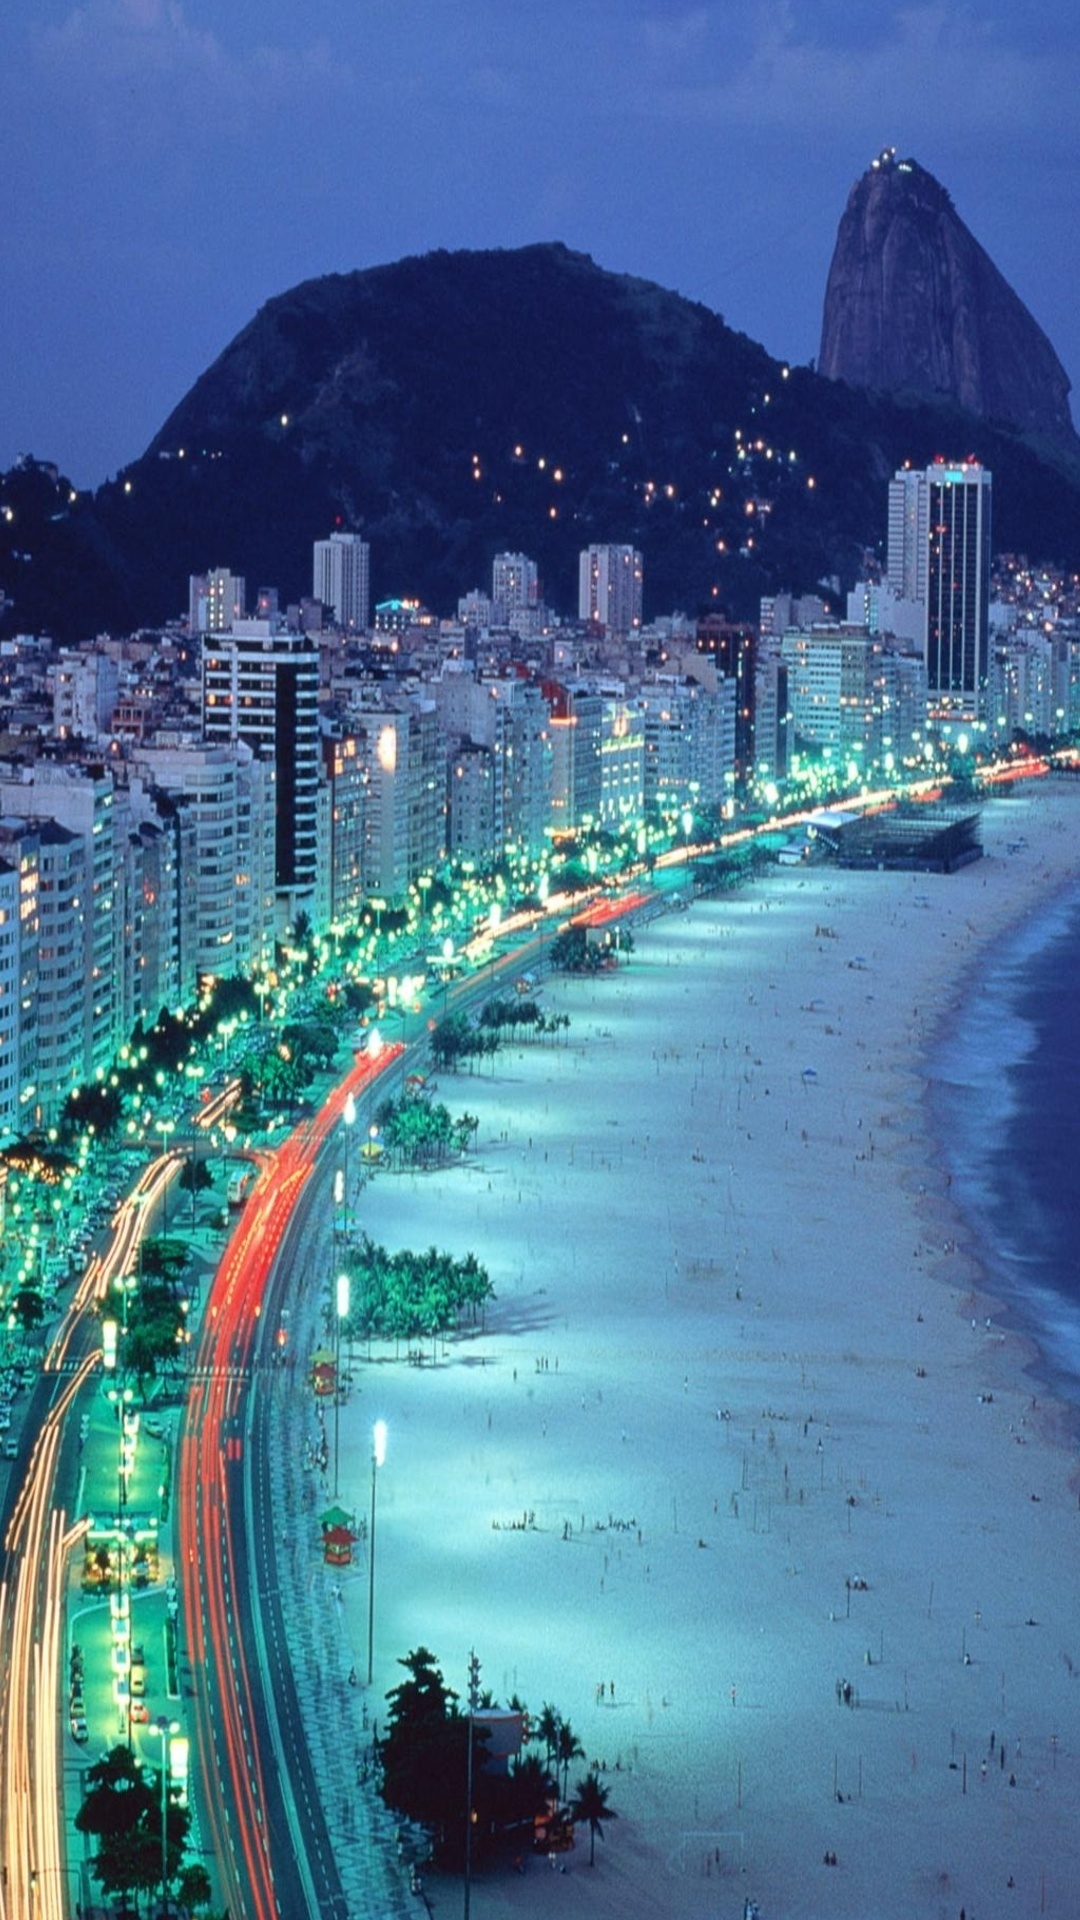 Rio de Janeiro iPhone wallpaper, Captivating images, Cultural richness, Beautiful scenery, 1080x1920 Full HD Handy